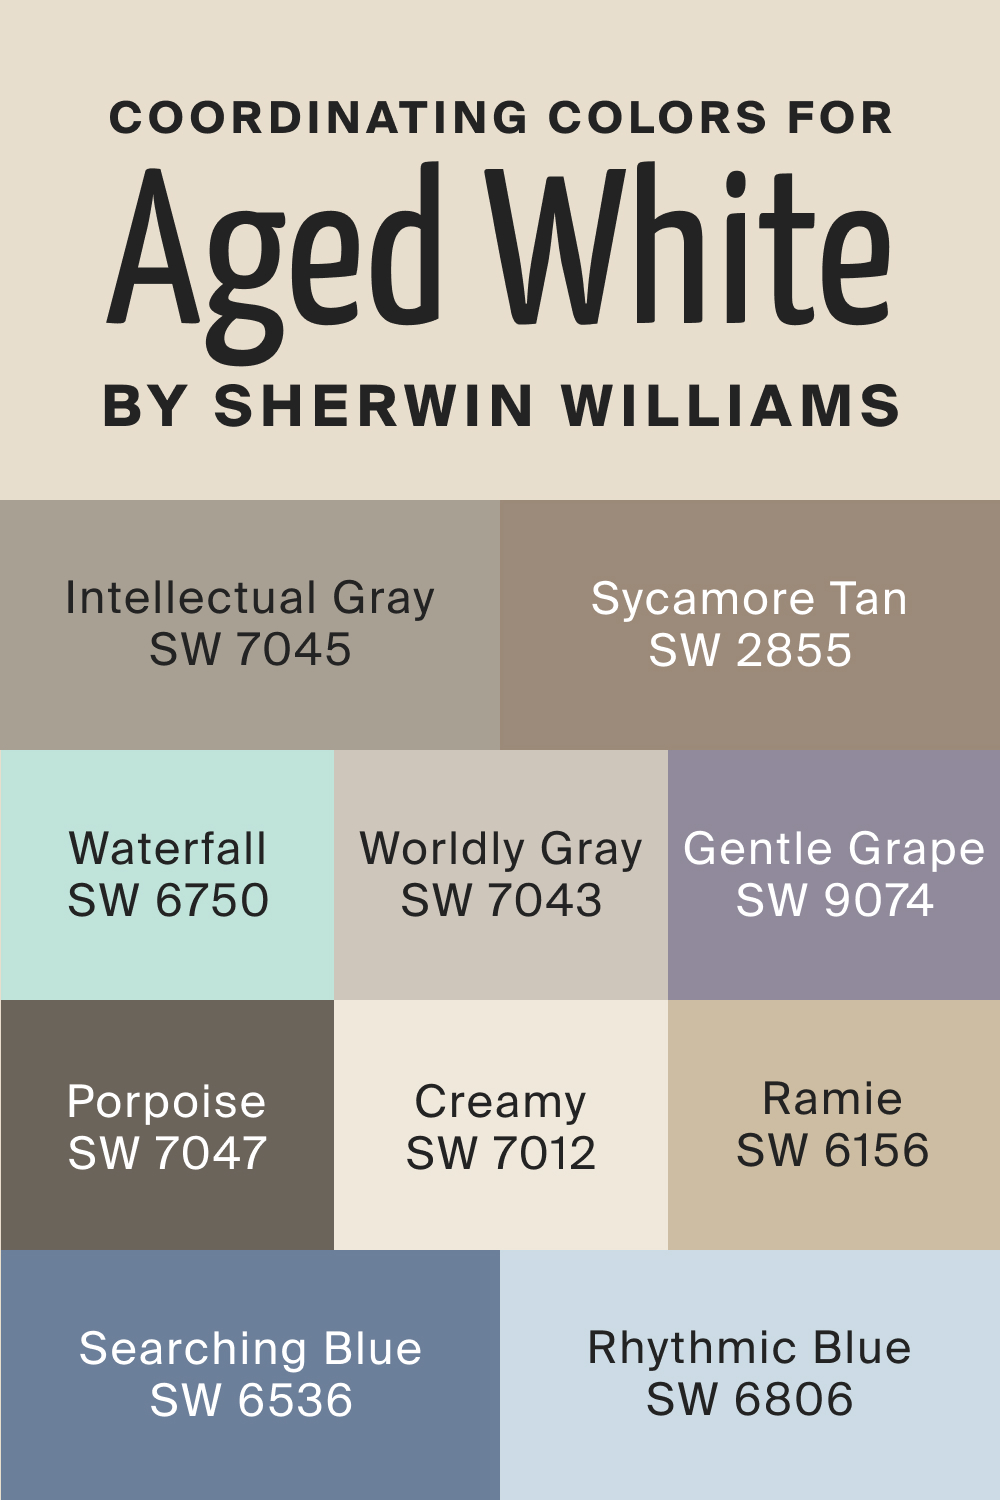 Coordinating Colors for SW Aged White by Sherwin Williams